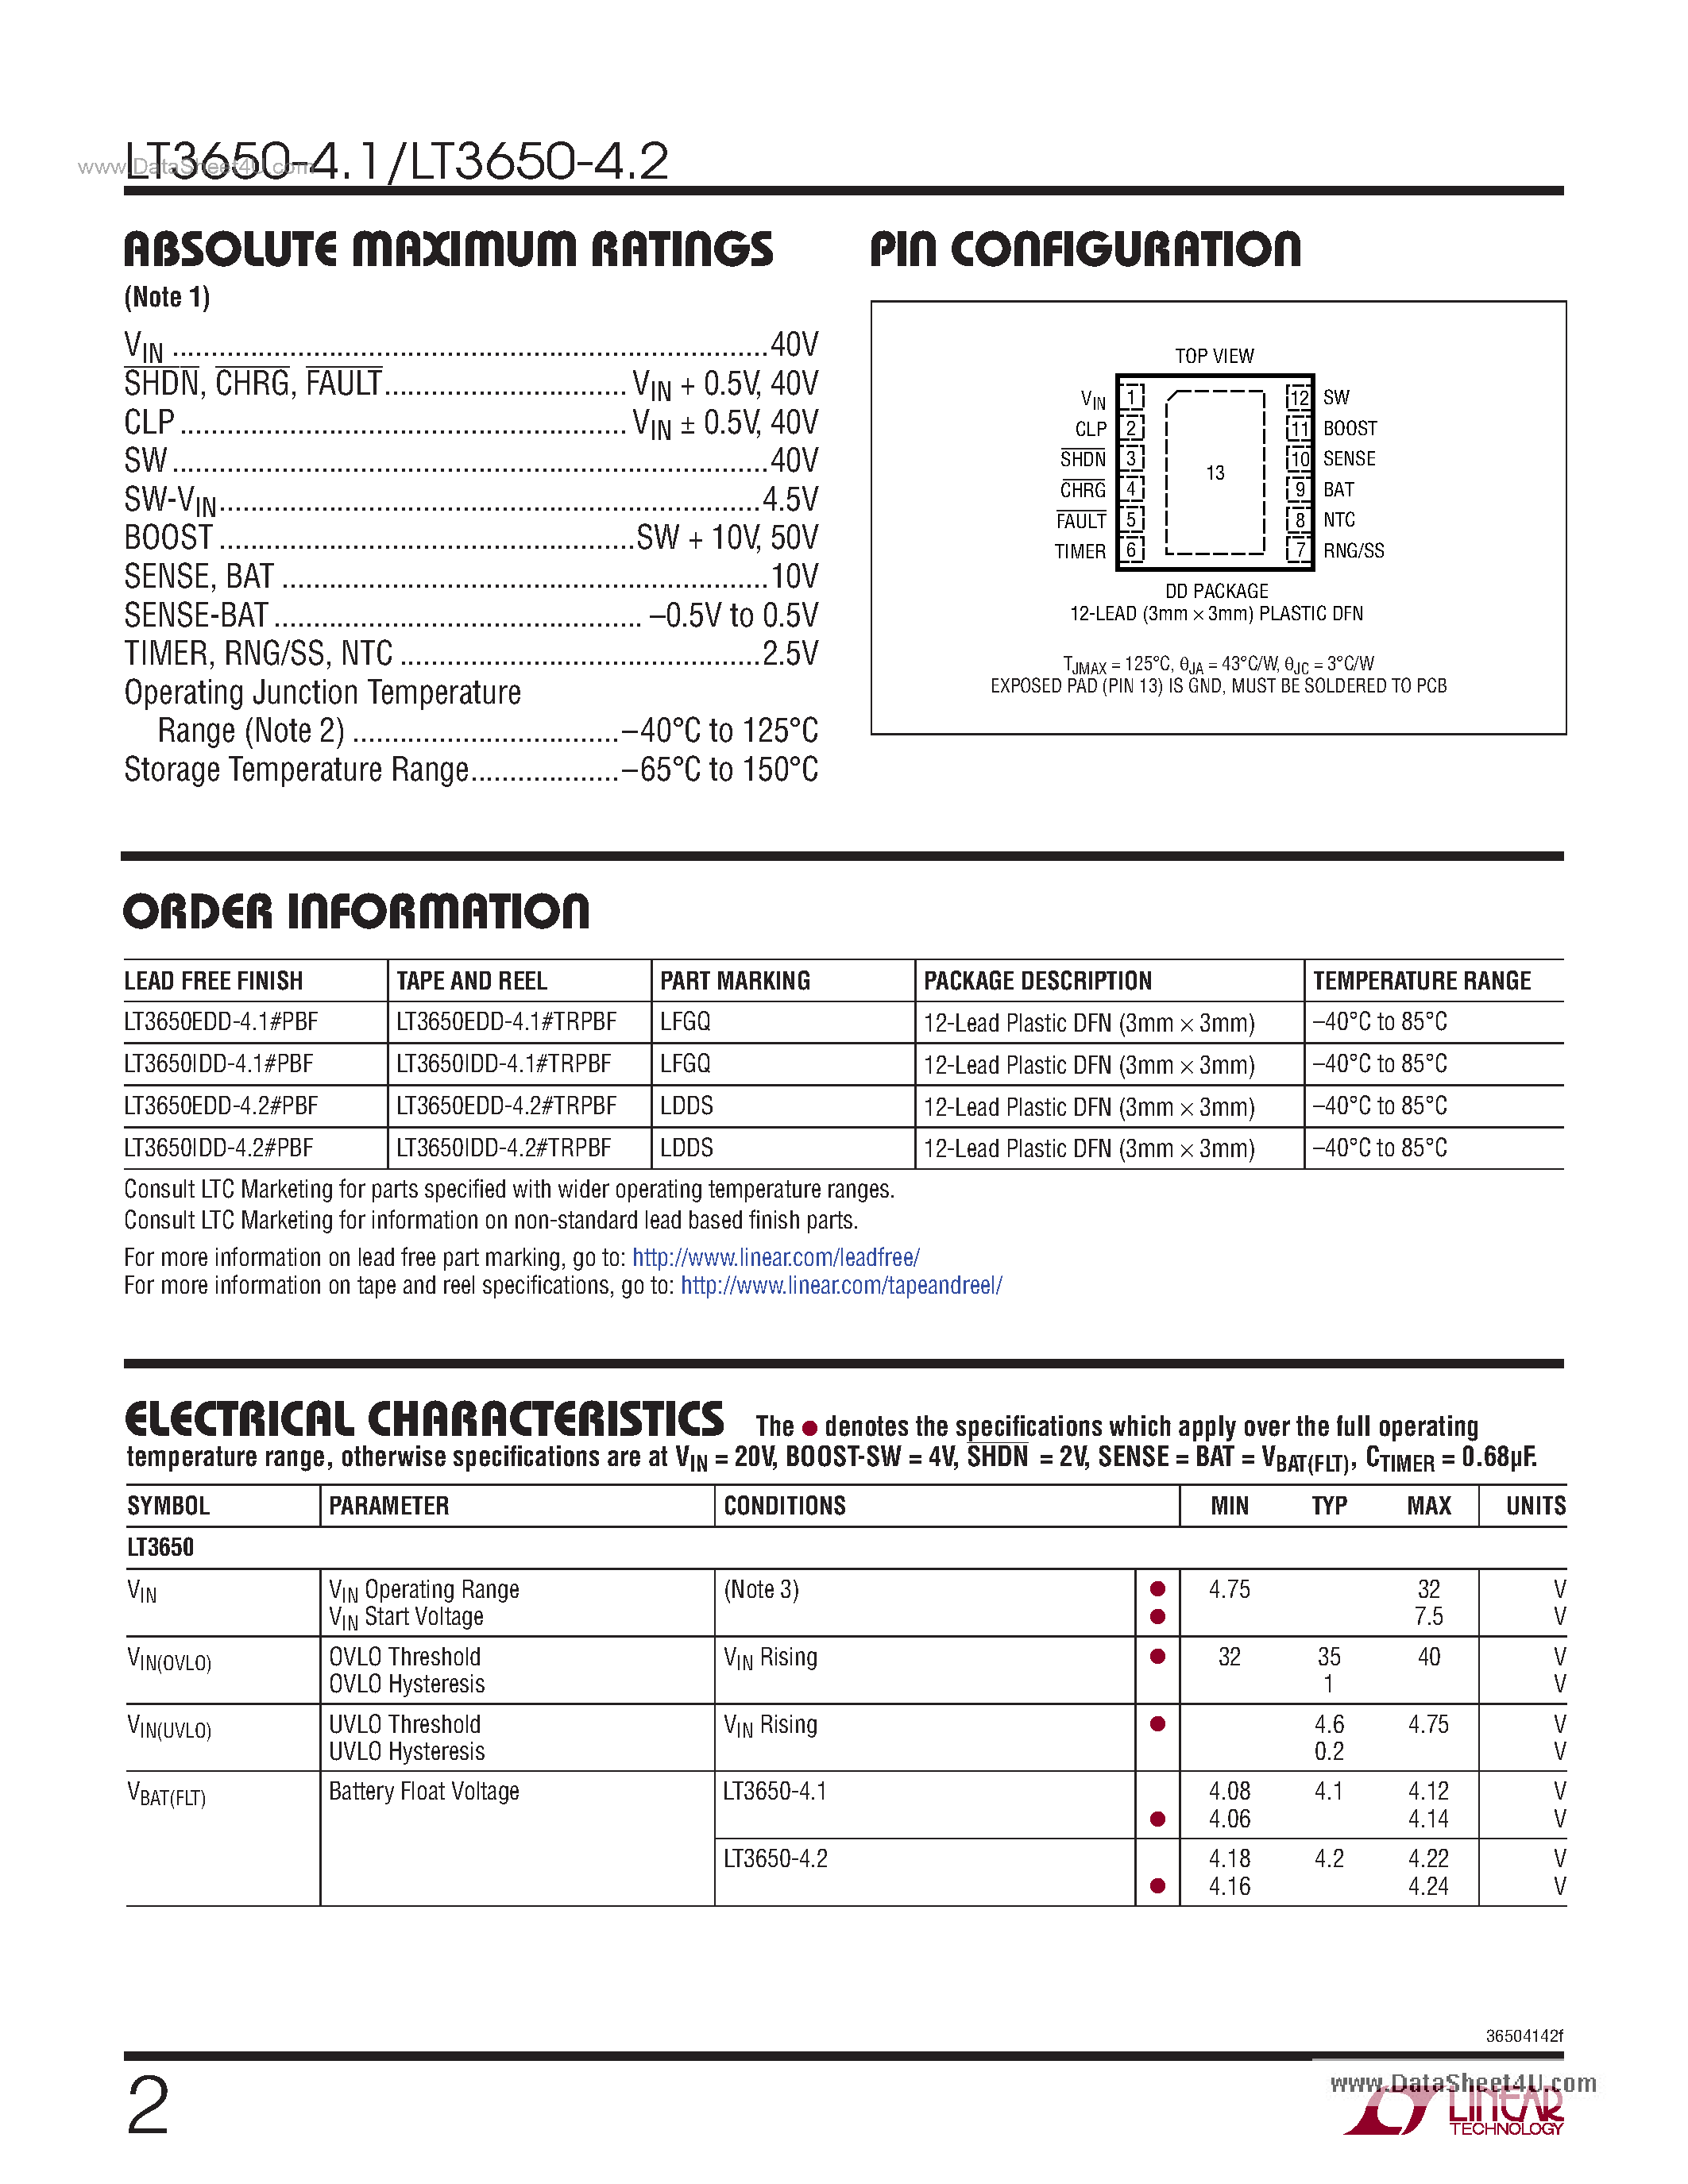 Datasheet LT3650-4.1 - (LT3650-4.1 / -4.2) High Voltage 2 Amp Monolithic Li-Ion Battery Charger page 2